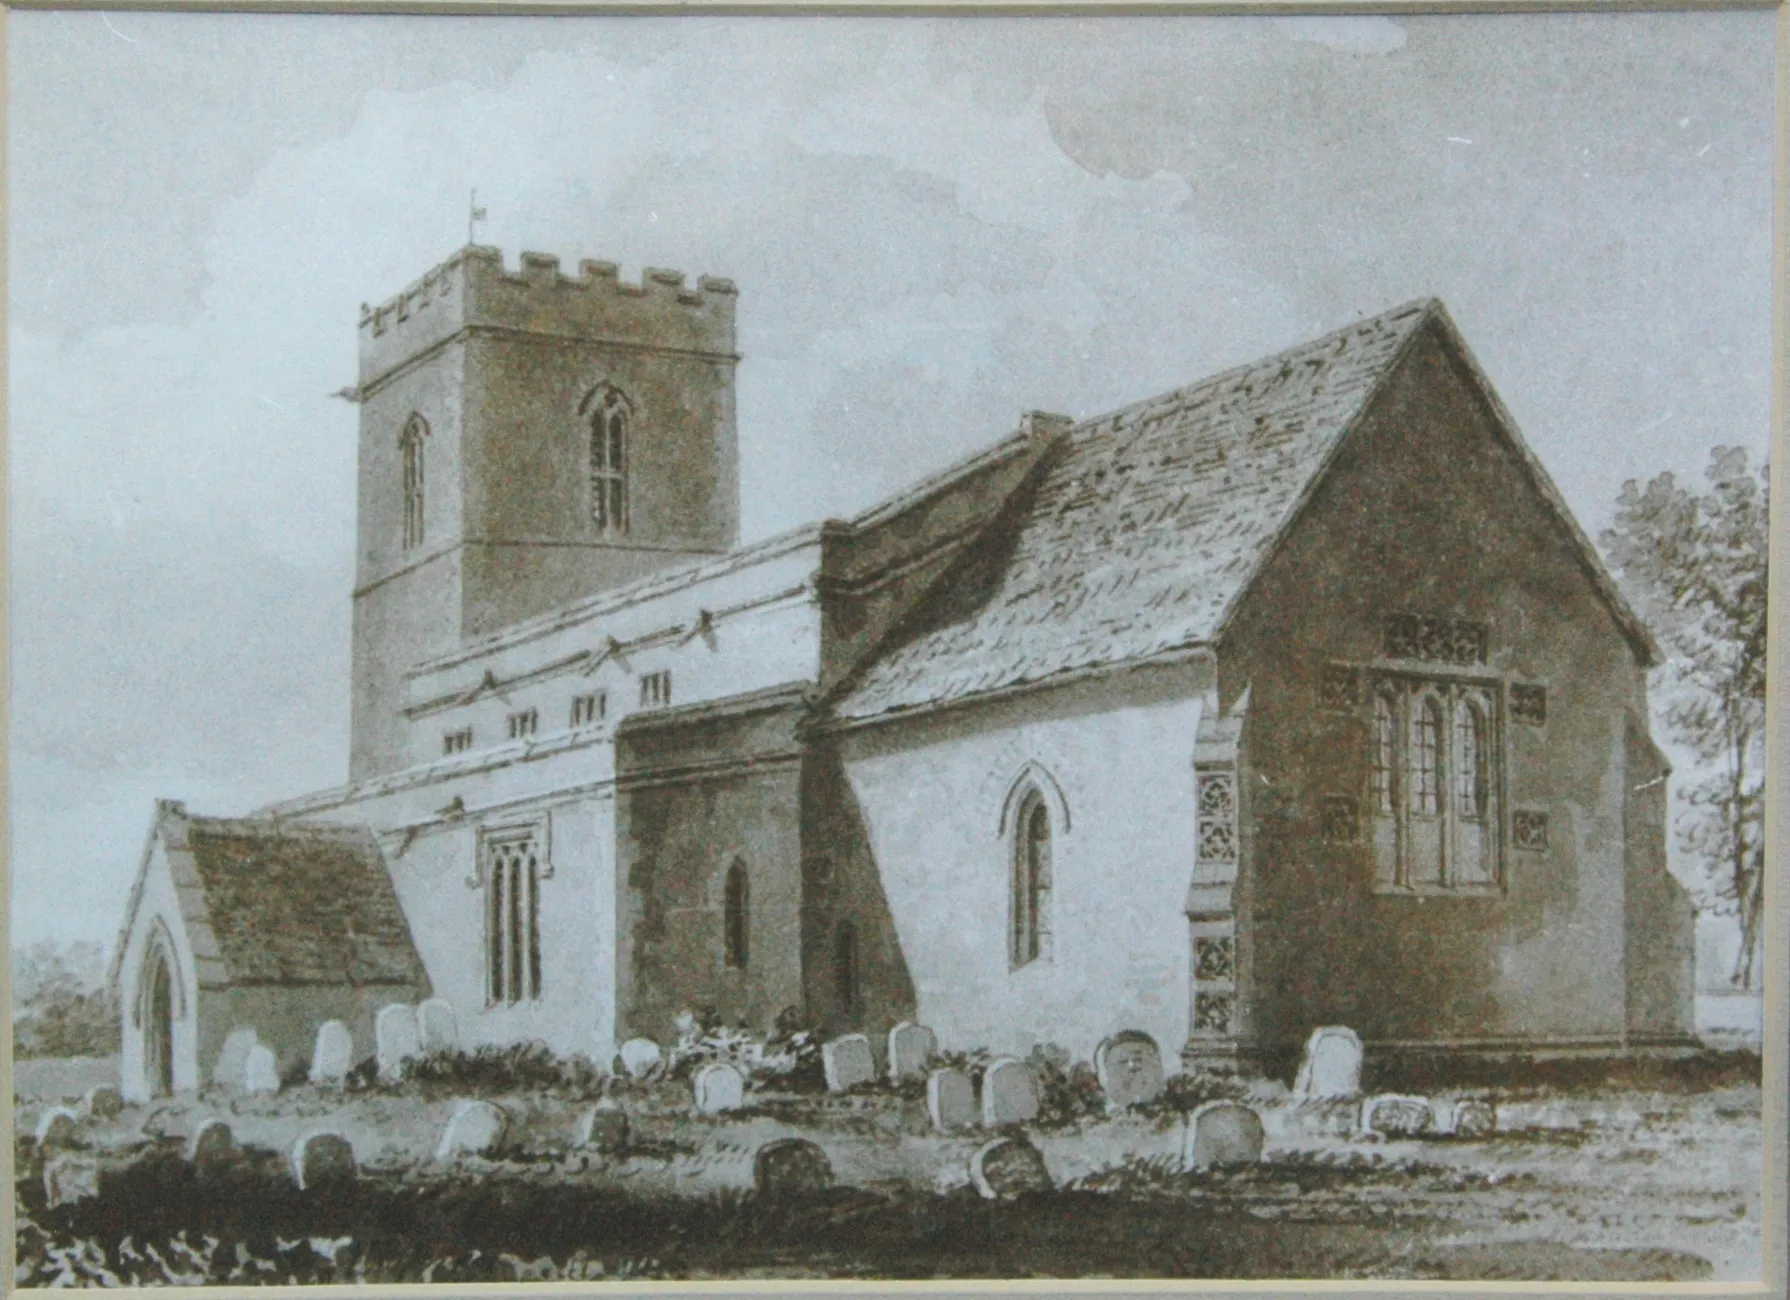 Photo showing: Church of England parish church of St Olave, Fritwell, Oxfordshire: view of the church from the south-east before 1865, when it was restored.